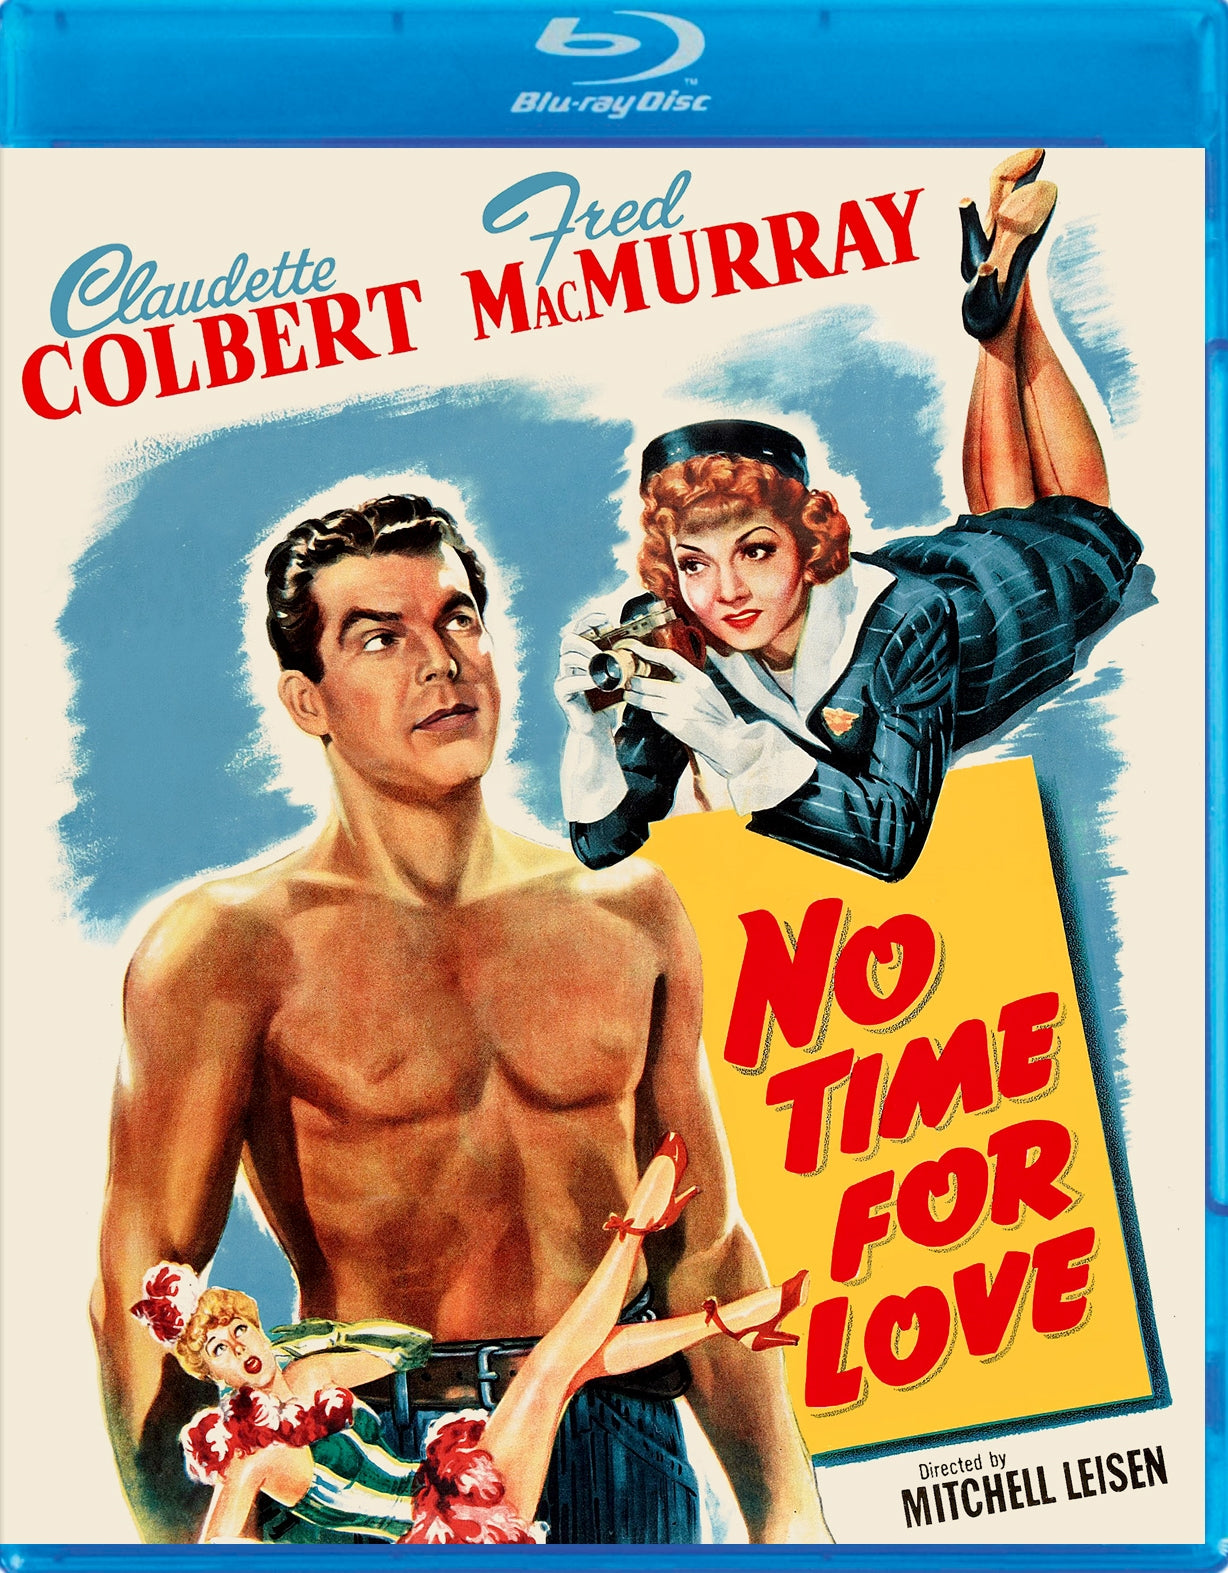 No Time for Love [Blu-ray] cover art